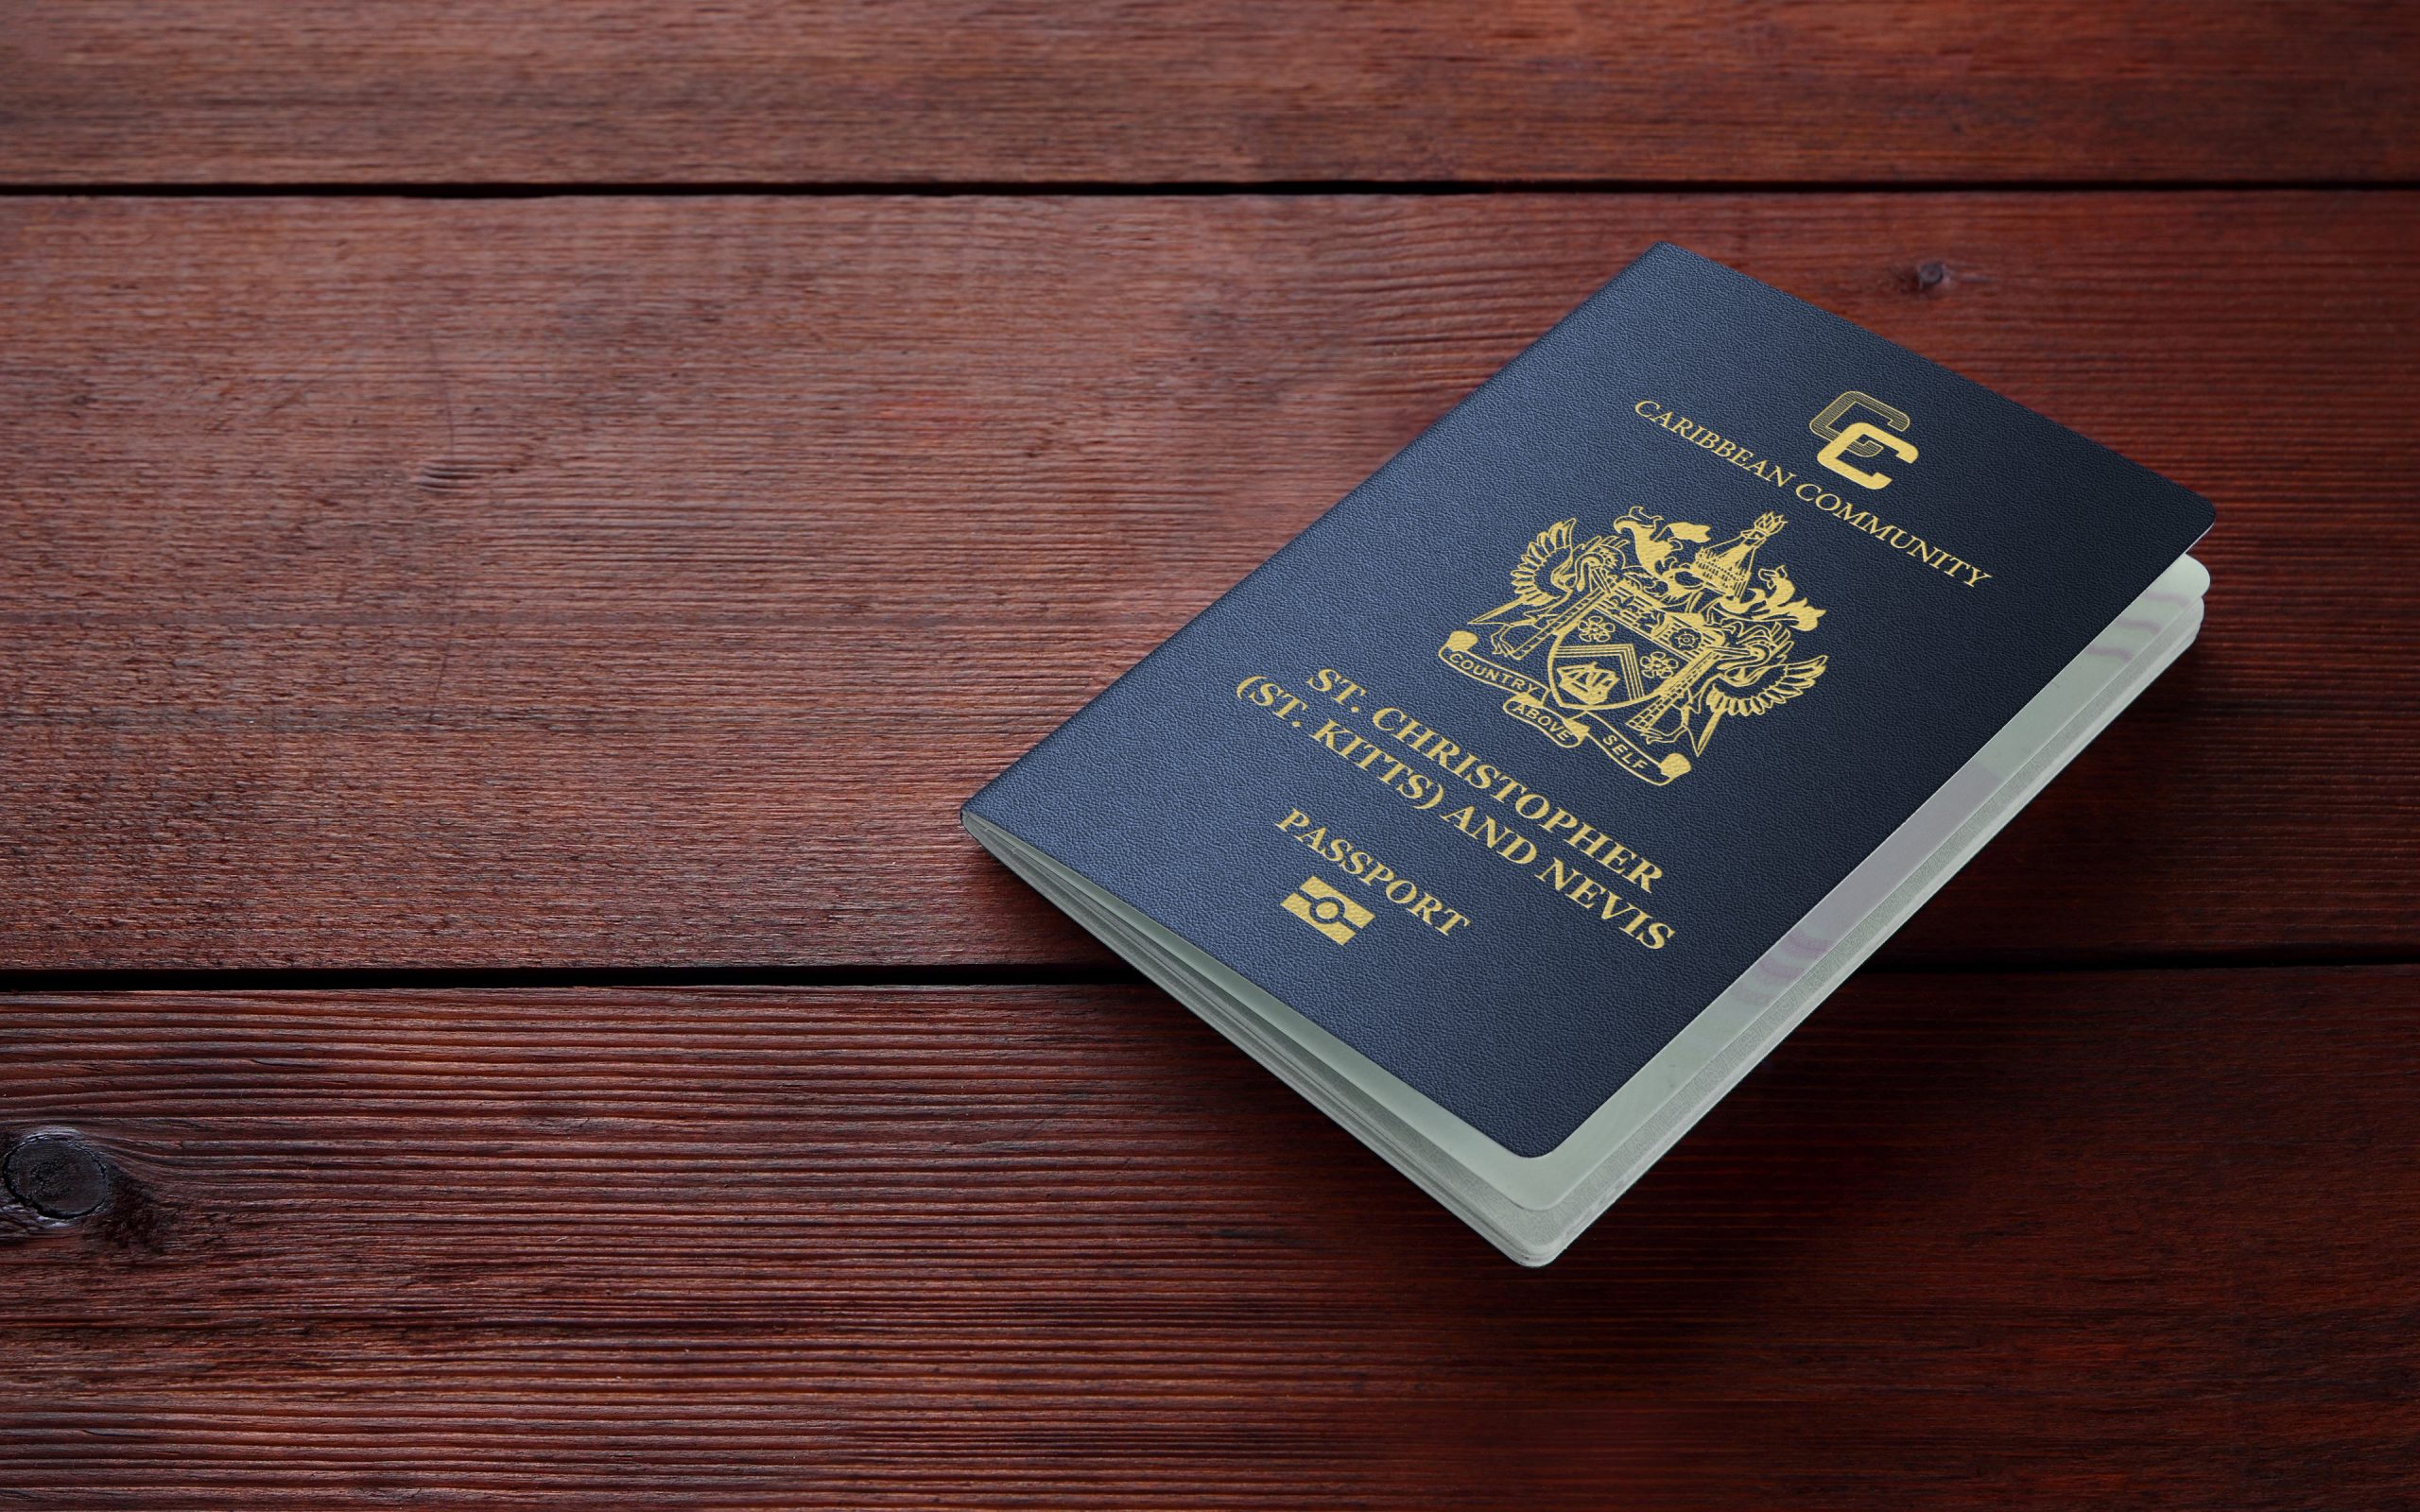 How to Apply for St. Kitts and Nevis Citizenship